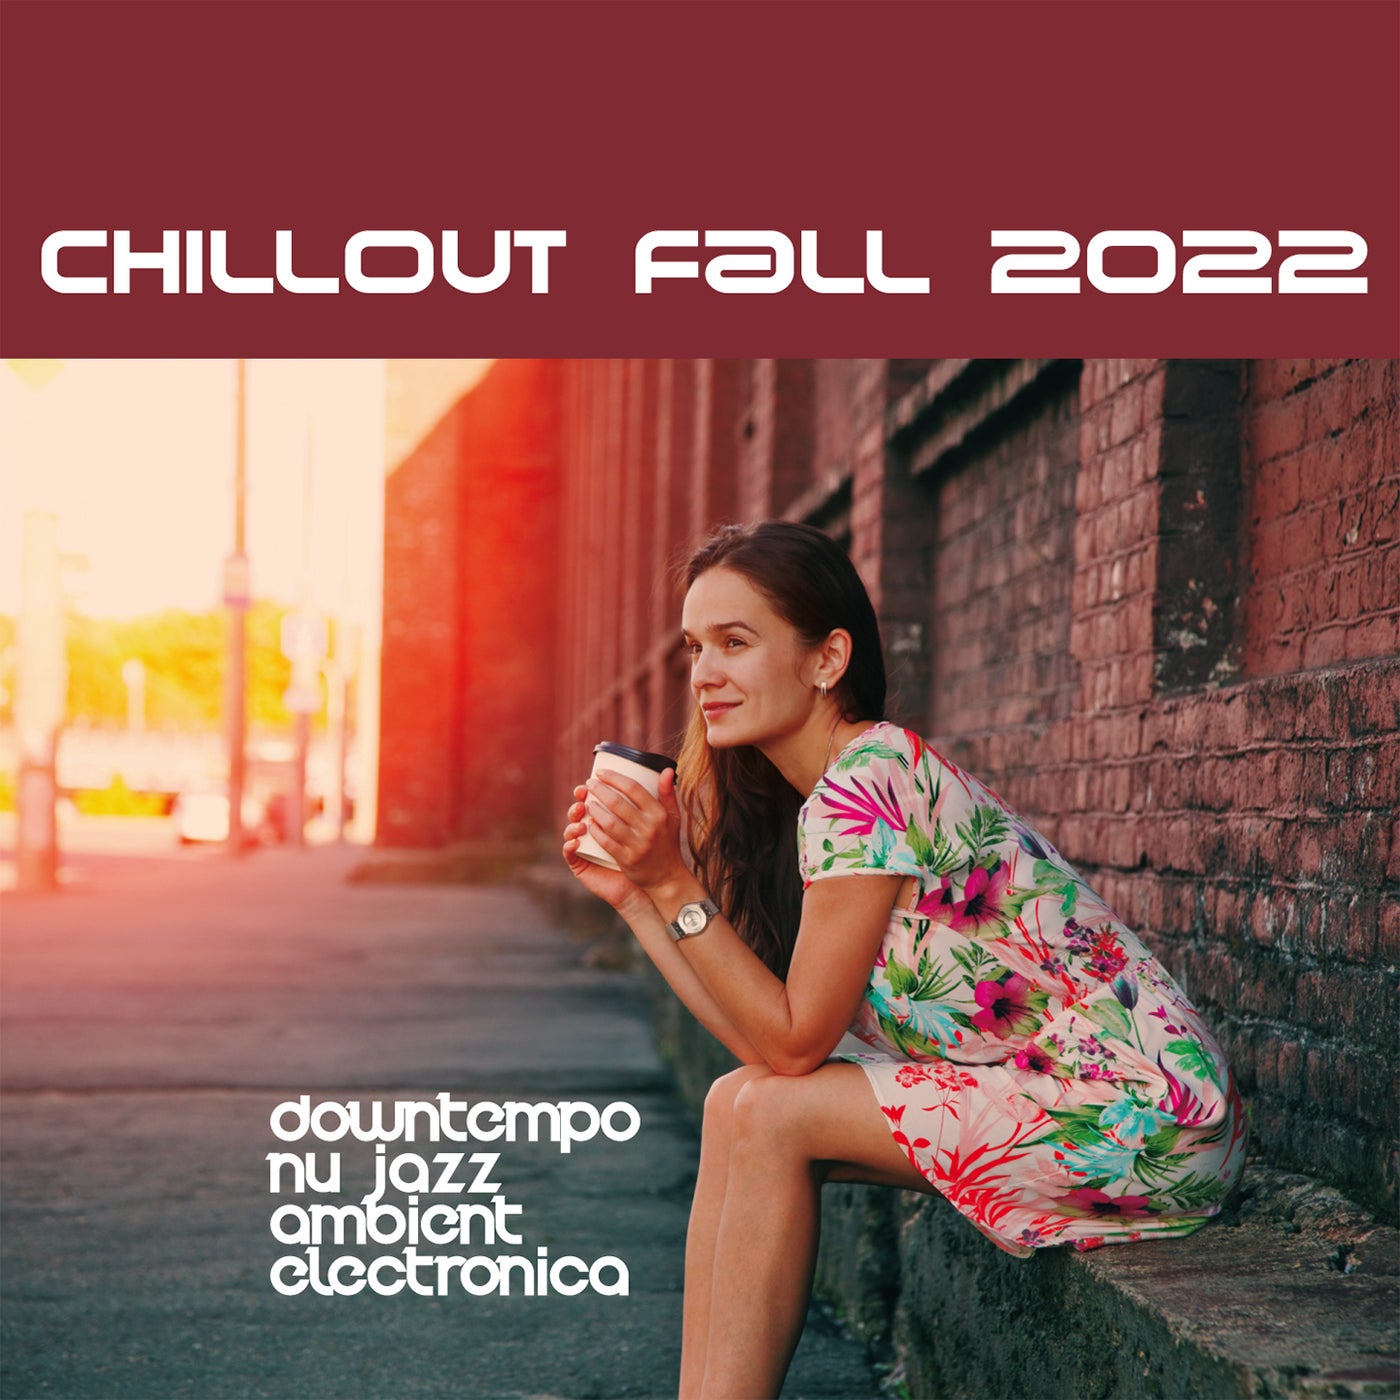 Chillout Fall 2022 - Downtempo, Nu Jazz, Ambient, Electronica